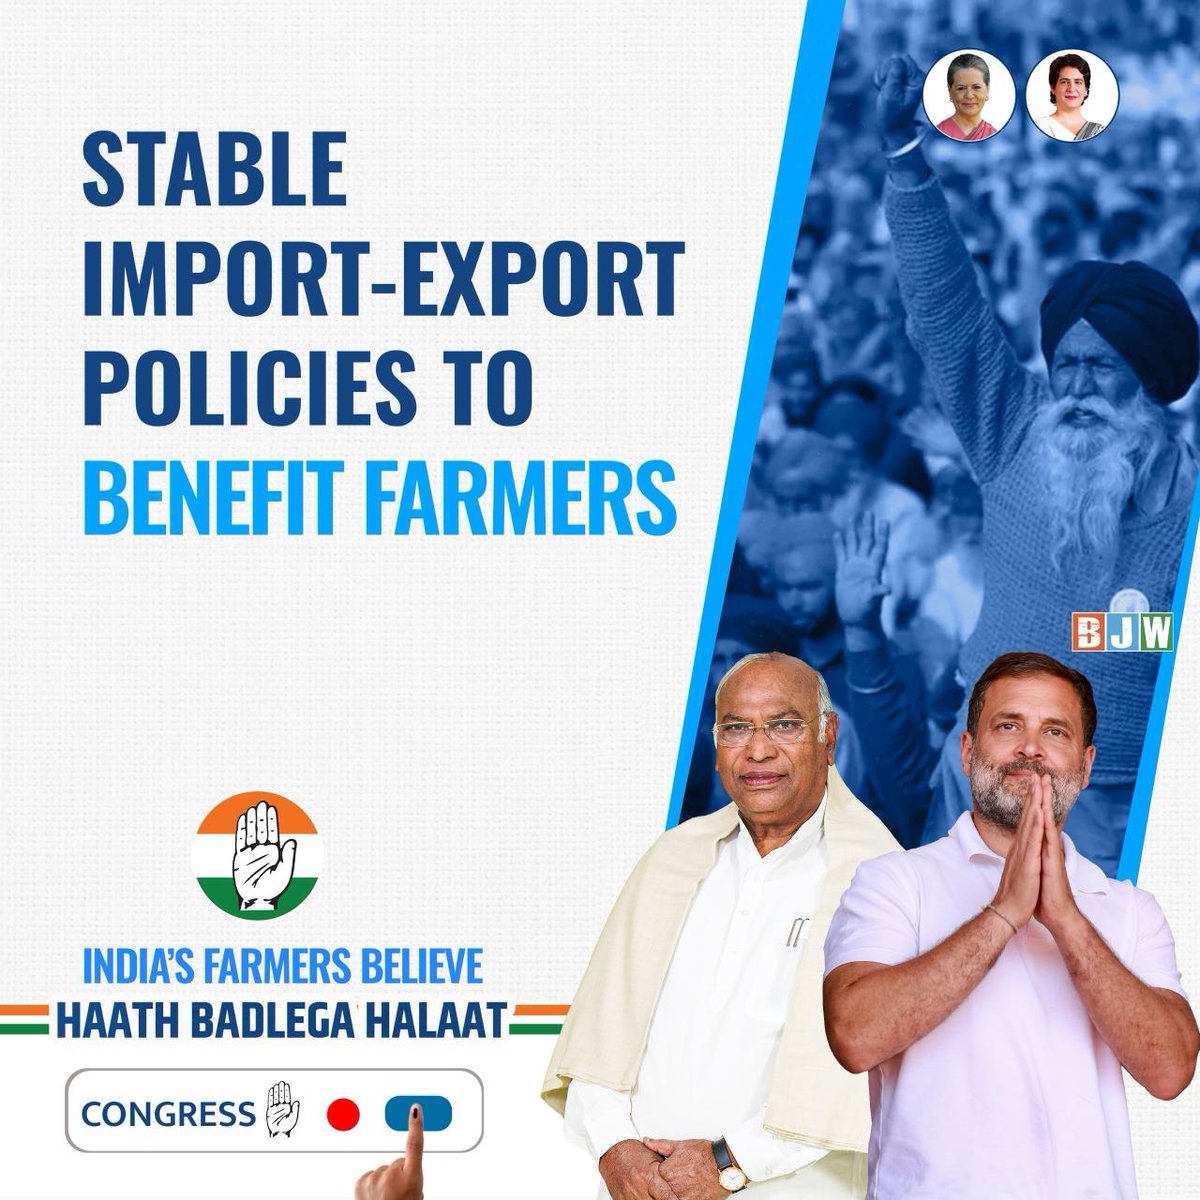 Congress Nyay Patra belongs to everyone! From providing Minimum Support Price for farmers to Rs 1 Lakh for a woman in the family, the Nyay Patra is about bringing real change and not being filled with empty jumlas. This Nyay Patra is the voice of the people. #HaathBadlegaHalaat